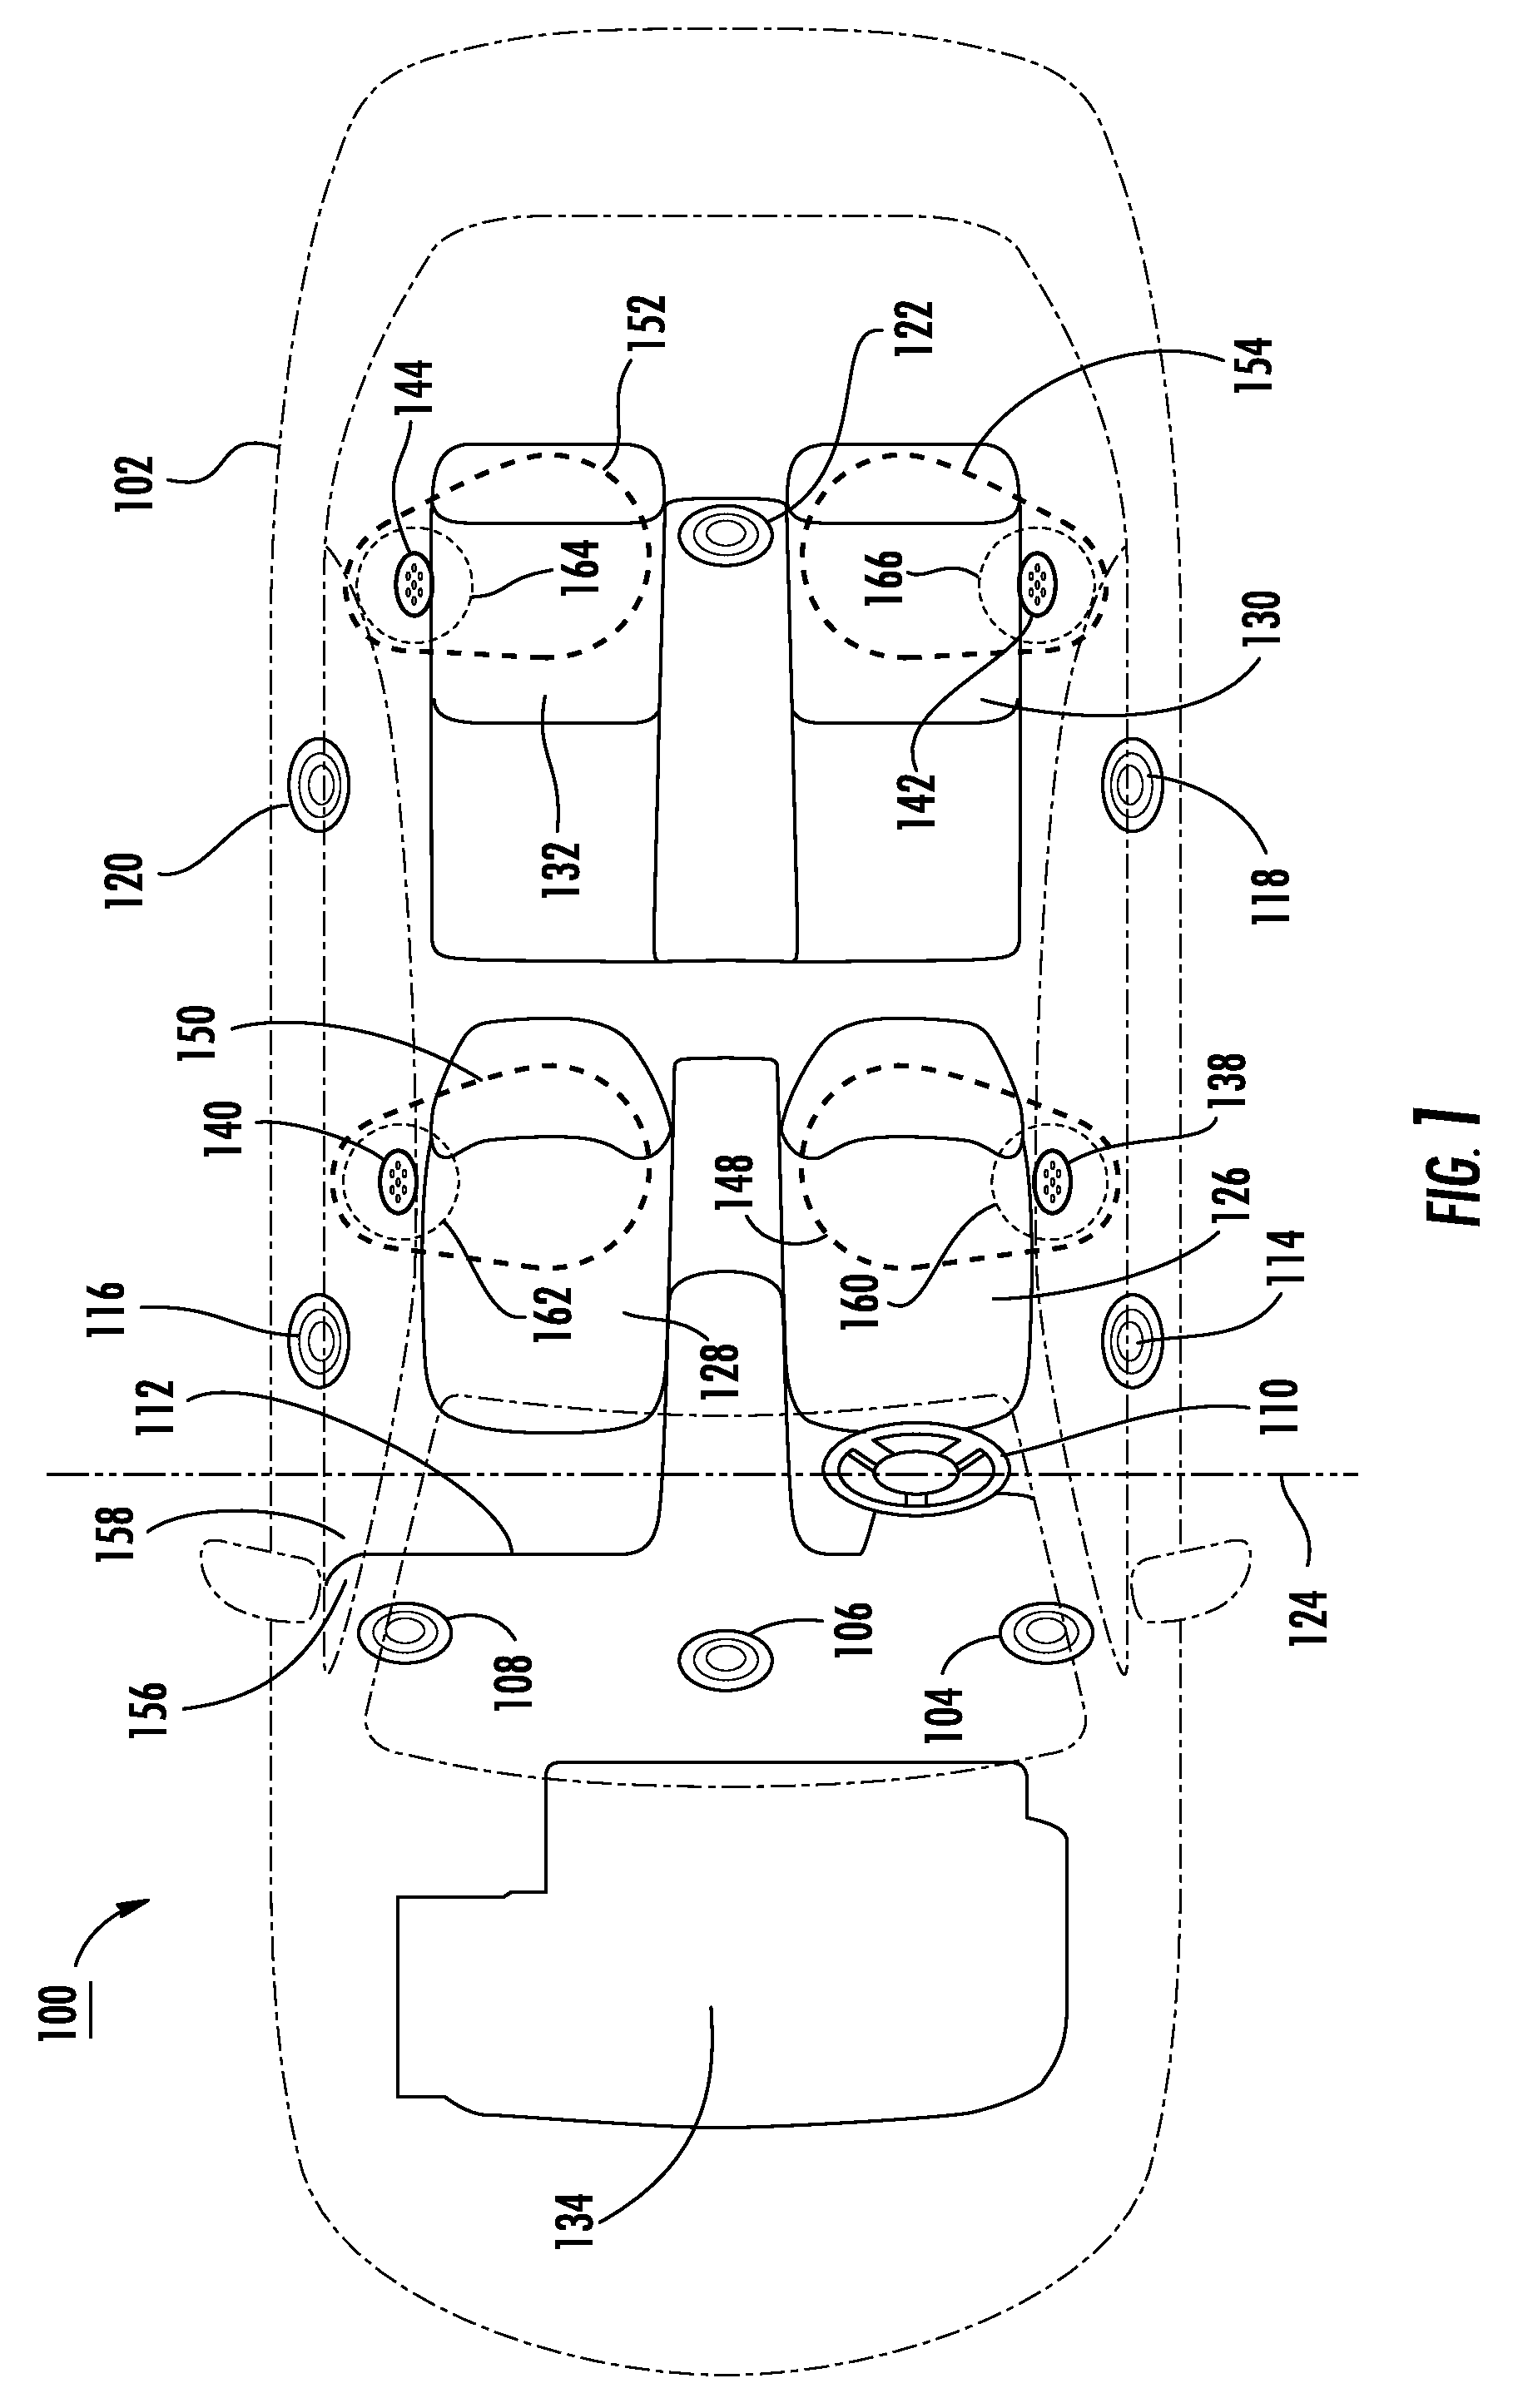 Forward speaker noise cancellation in a vehicle